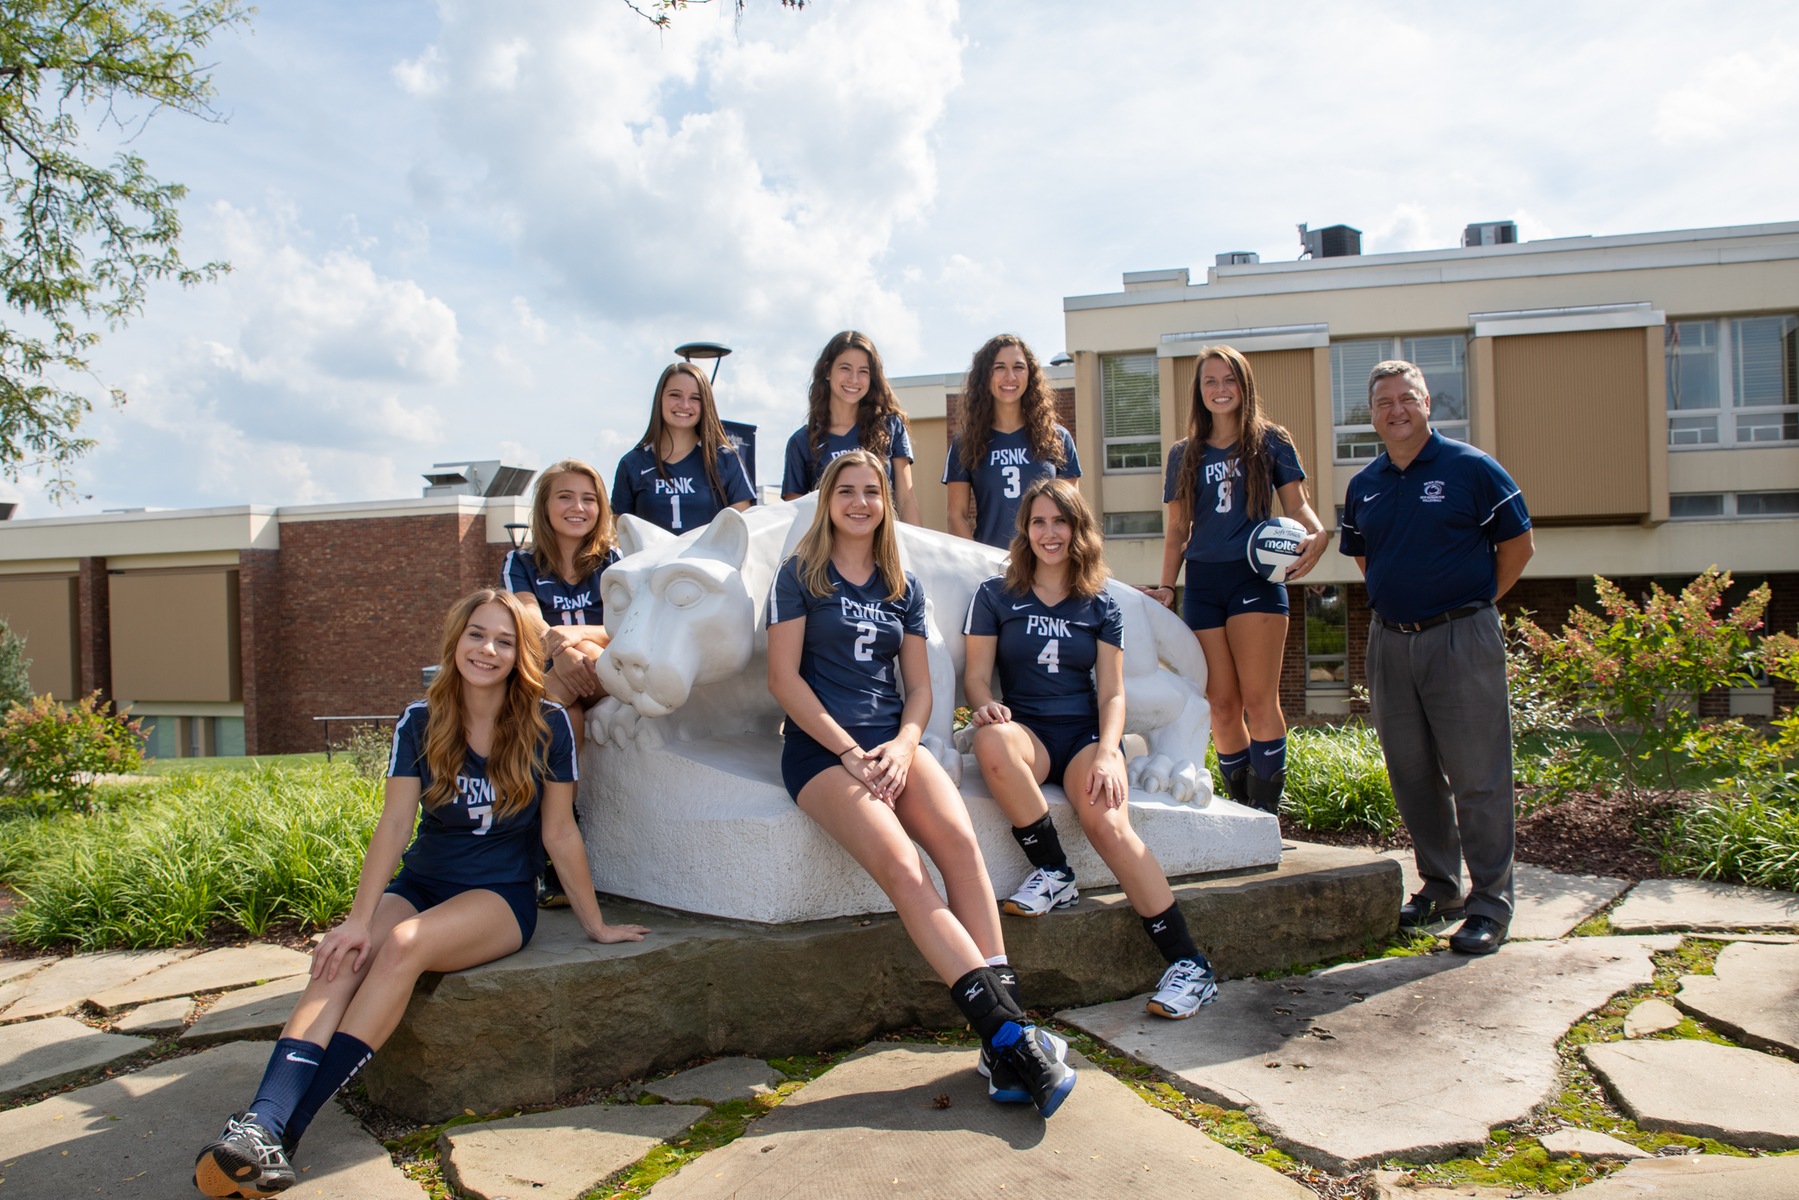 Women's Volleyball Splits at PSUAC/WPCC Challenge